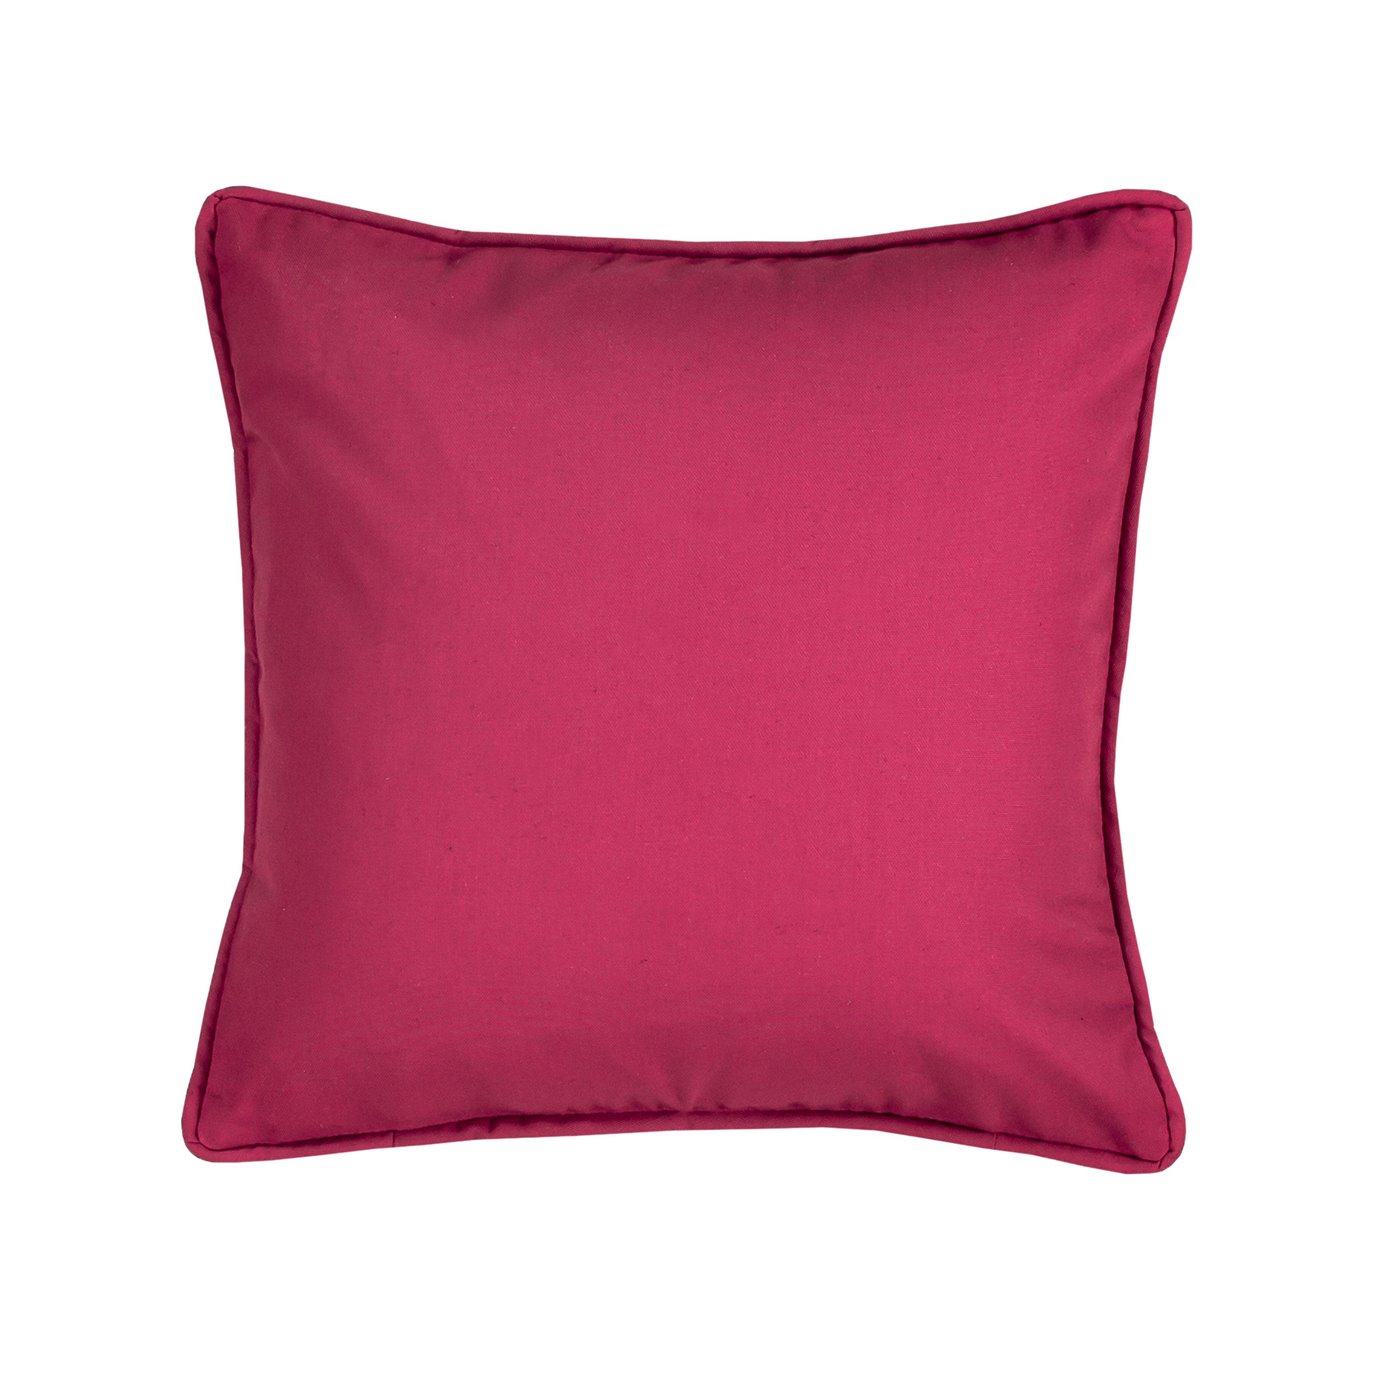 Cherry Blossom Square Pillow - Pink